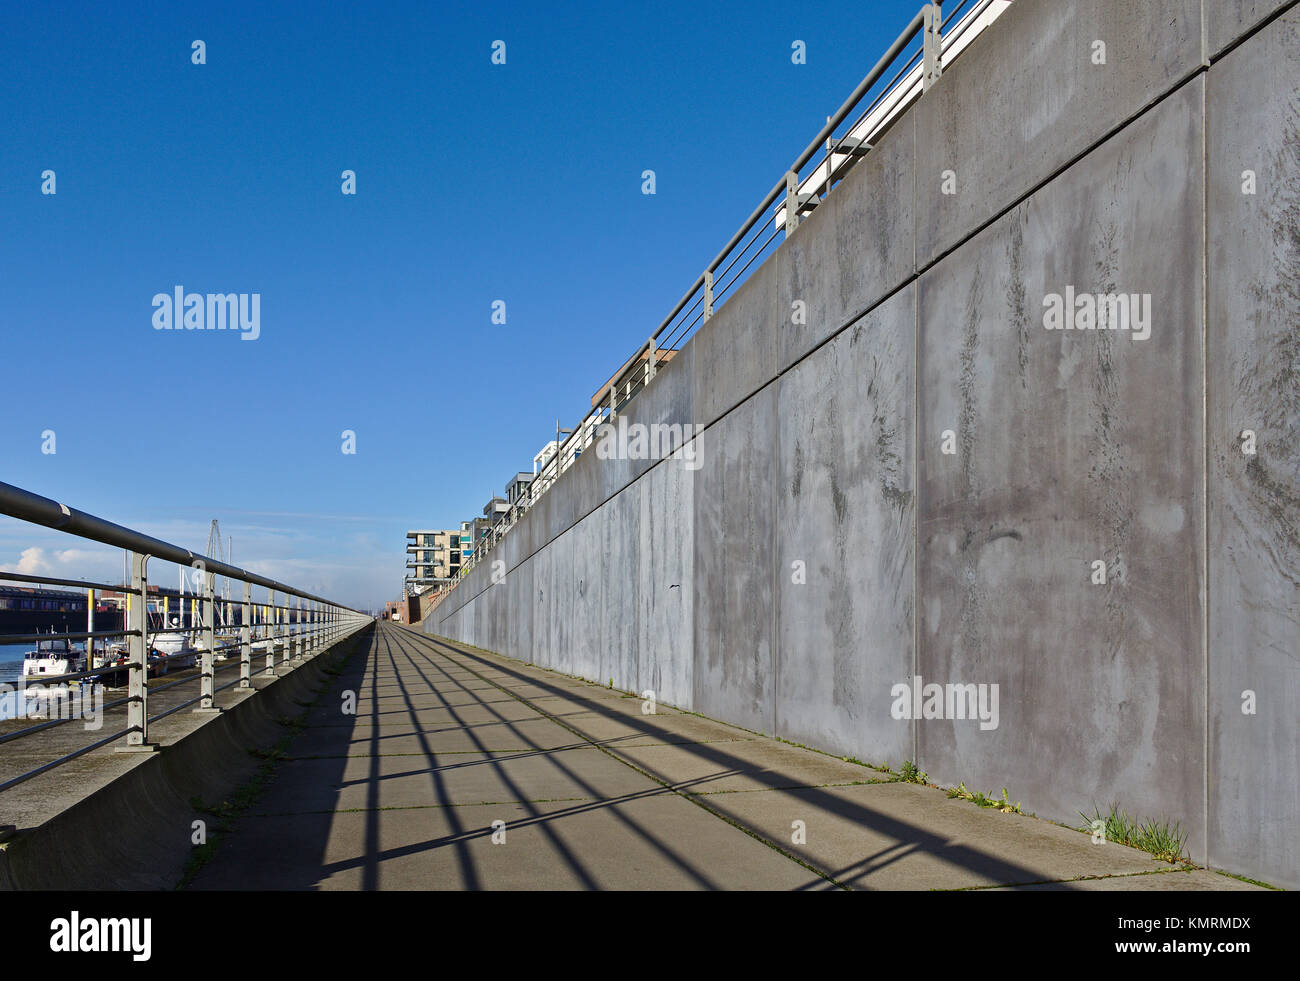 Esplanade along the Europa harbor in Bremen, Germany with metal railing, gray concrete wall, moored sailing yachts and a clear blue sky Stock Photo